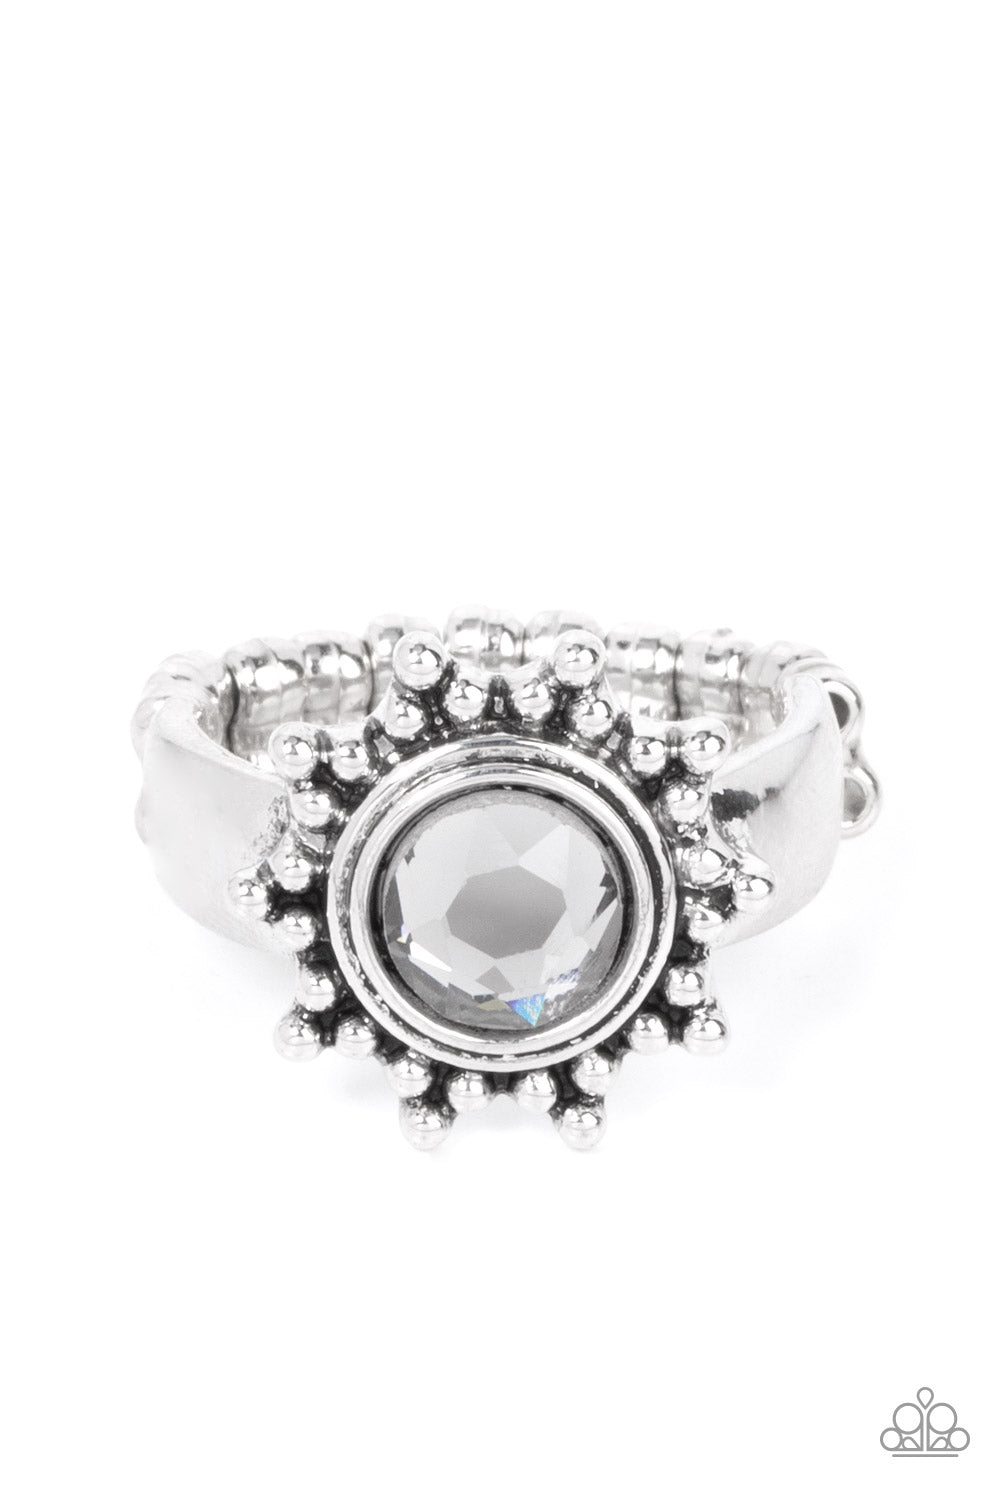 Expect Sunshine and REIGN - silver - Paparazzi ring